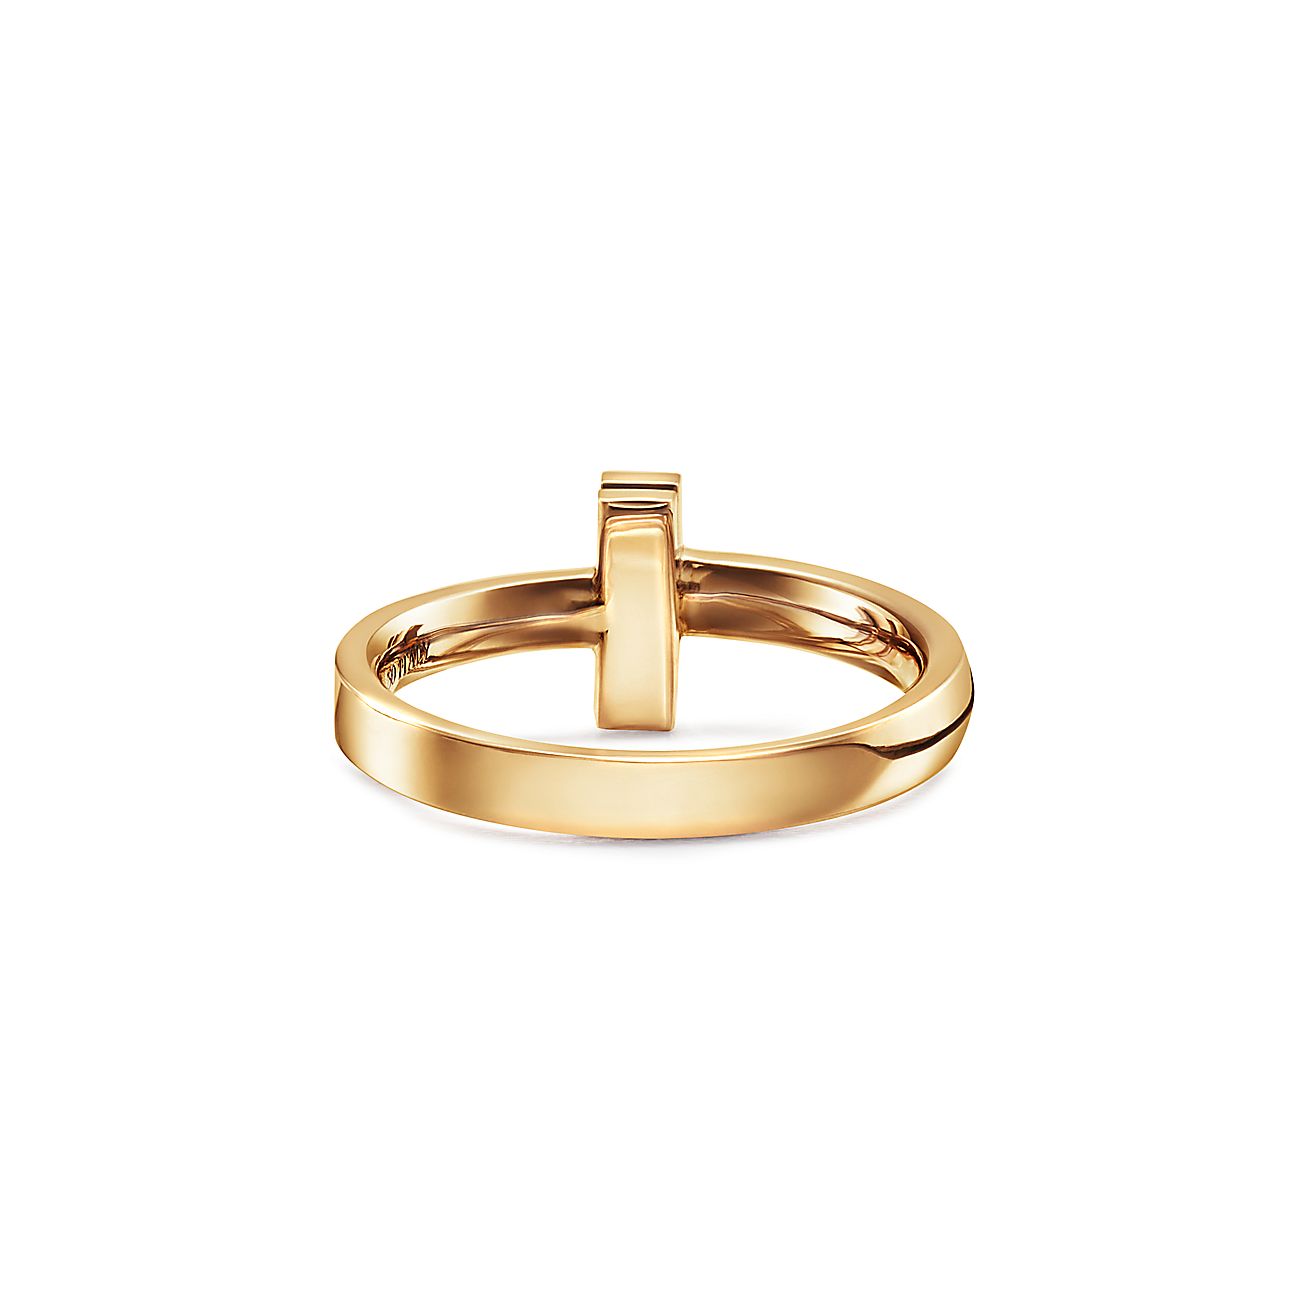 Tiffany T T1 Ring in Yellow Gold, 2.5 mm Wide | Tiffany & Co.